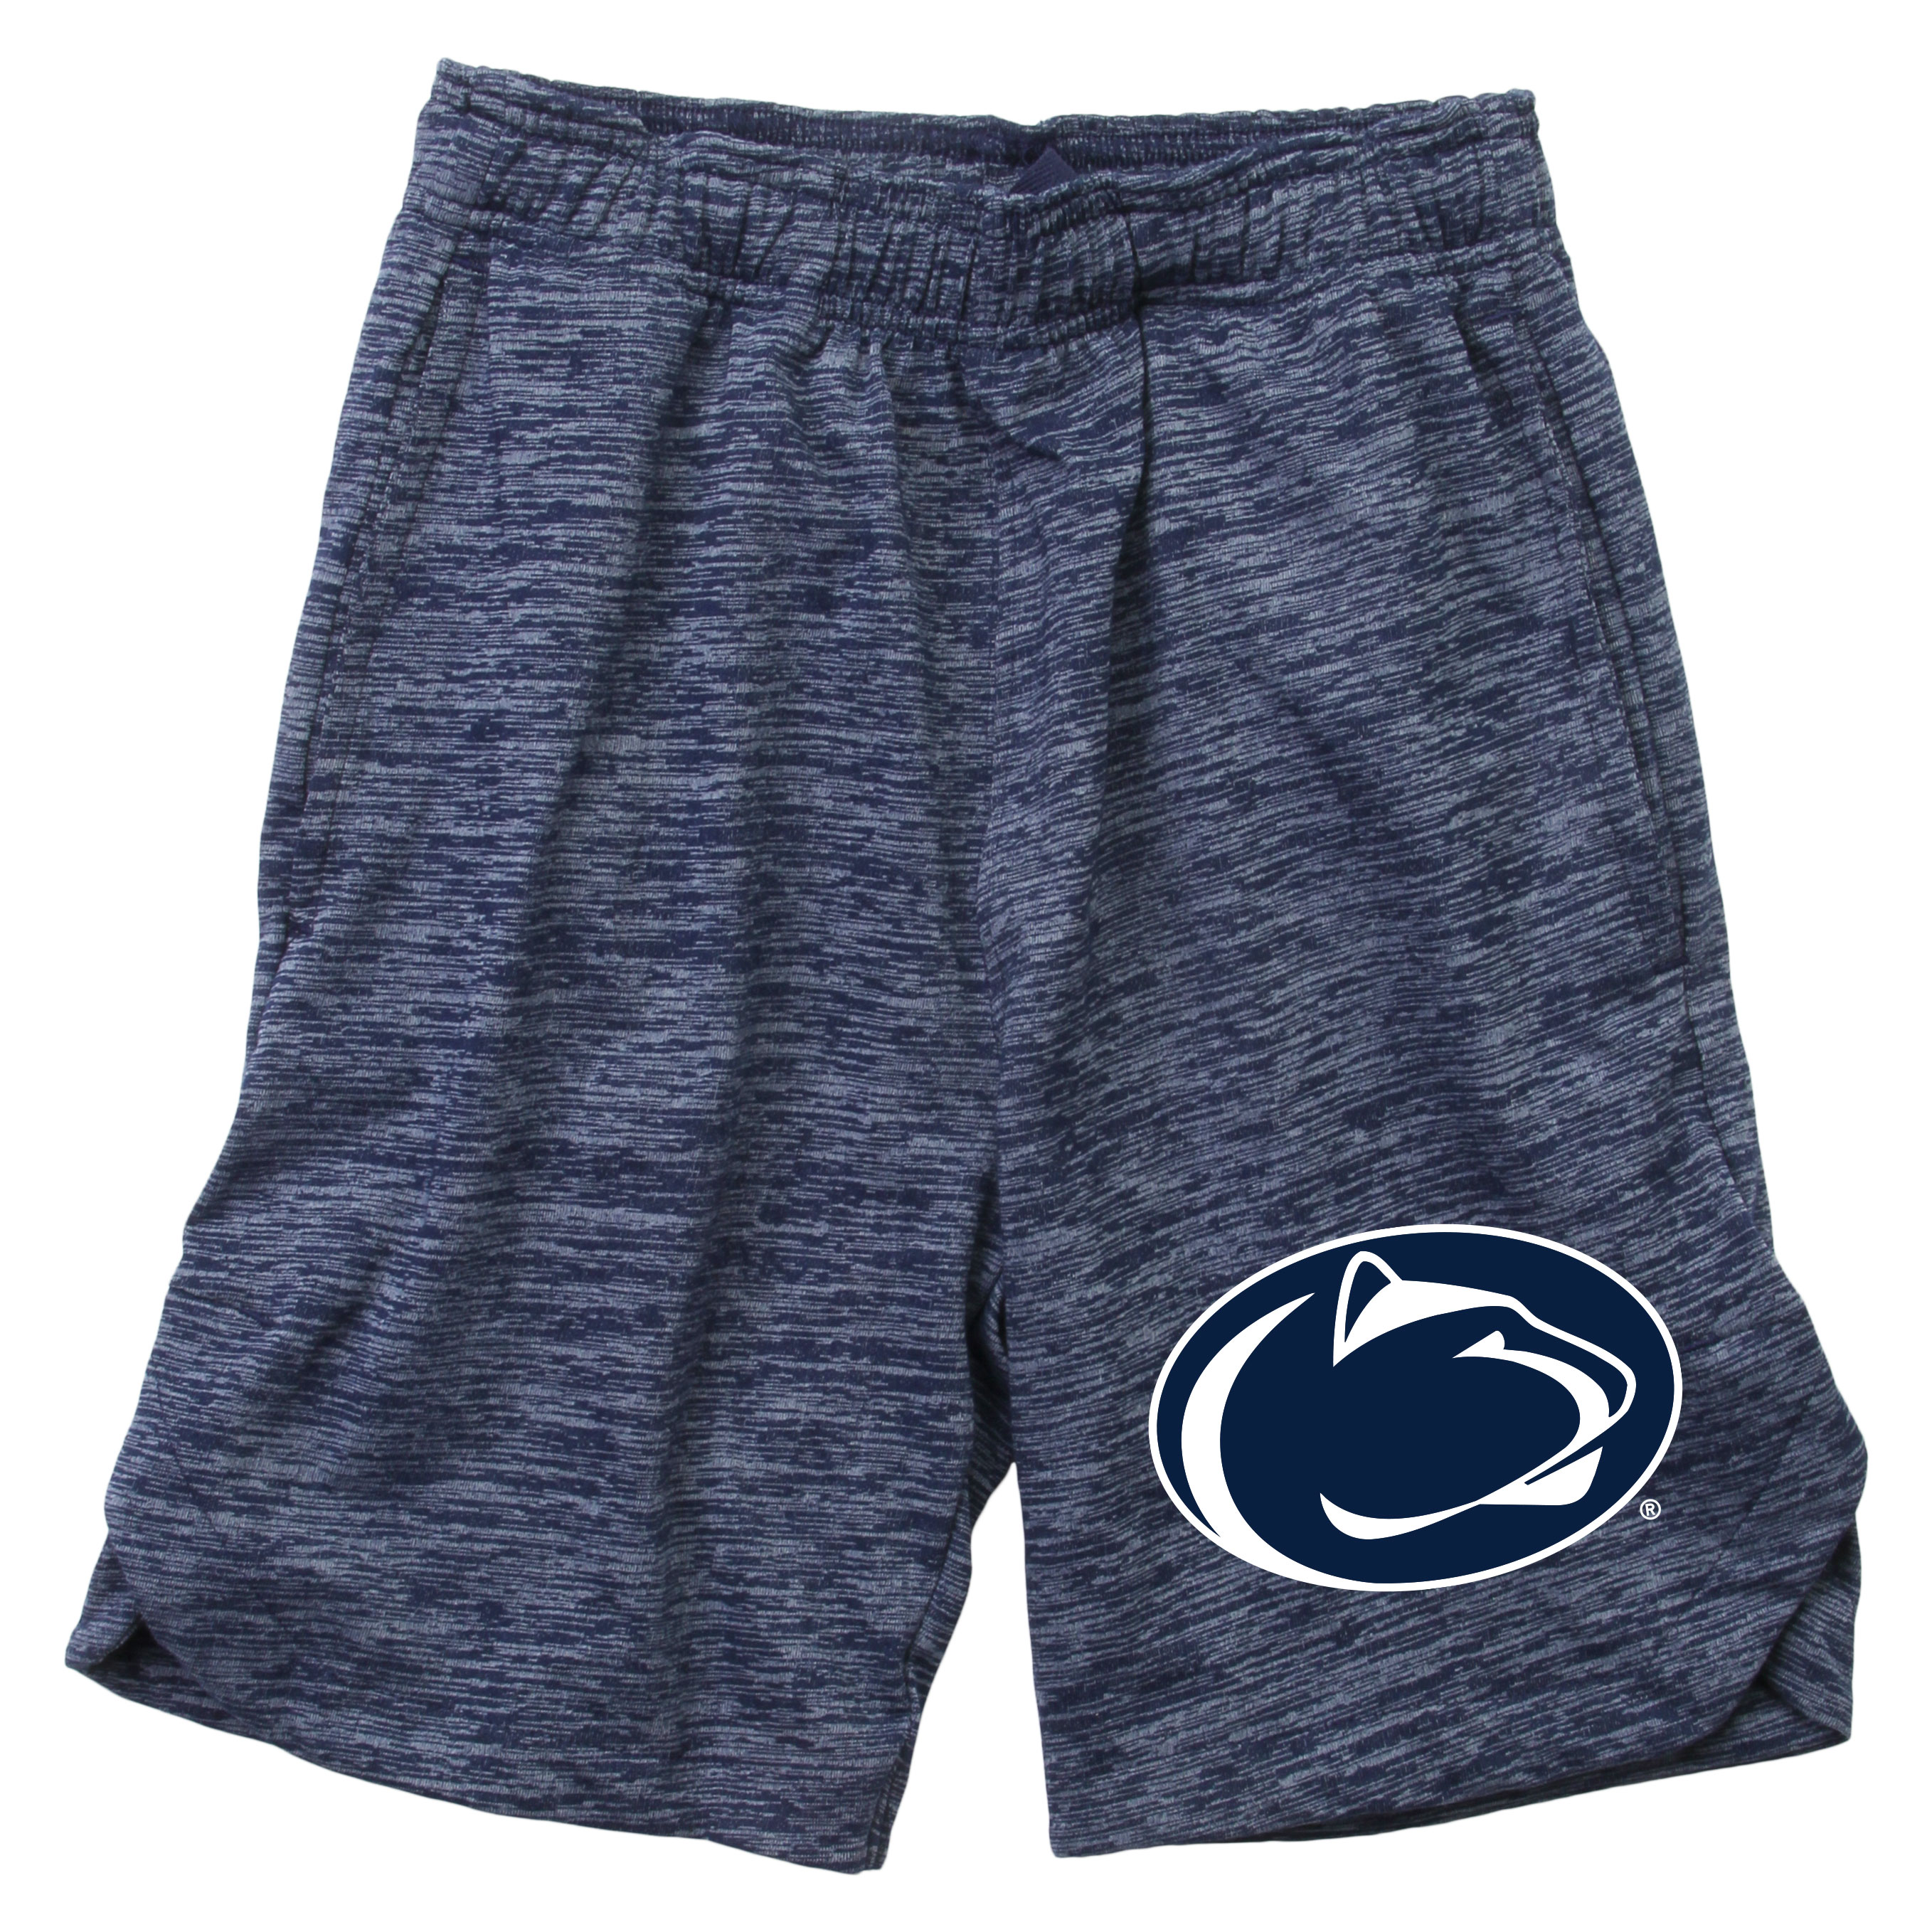 Wes And Willy Penn State Nittany Lions Youth Boys Cloudy Yarn Shorts